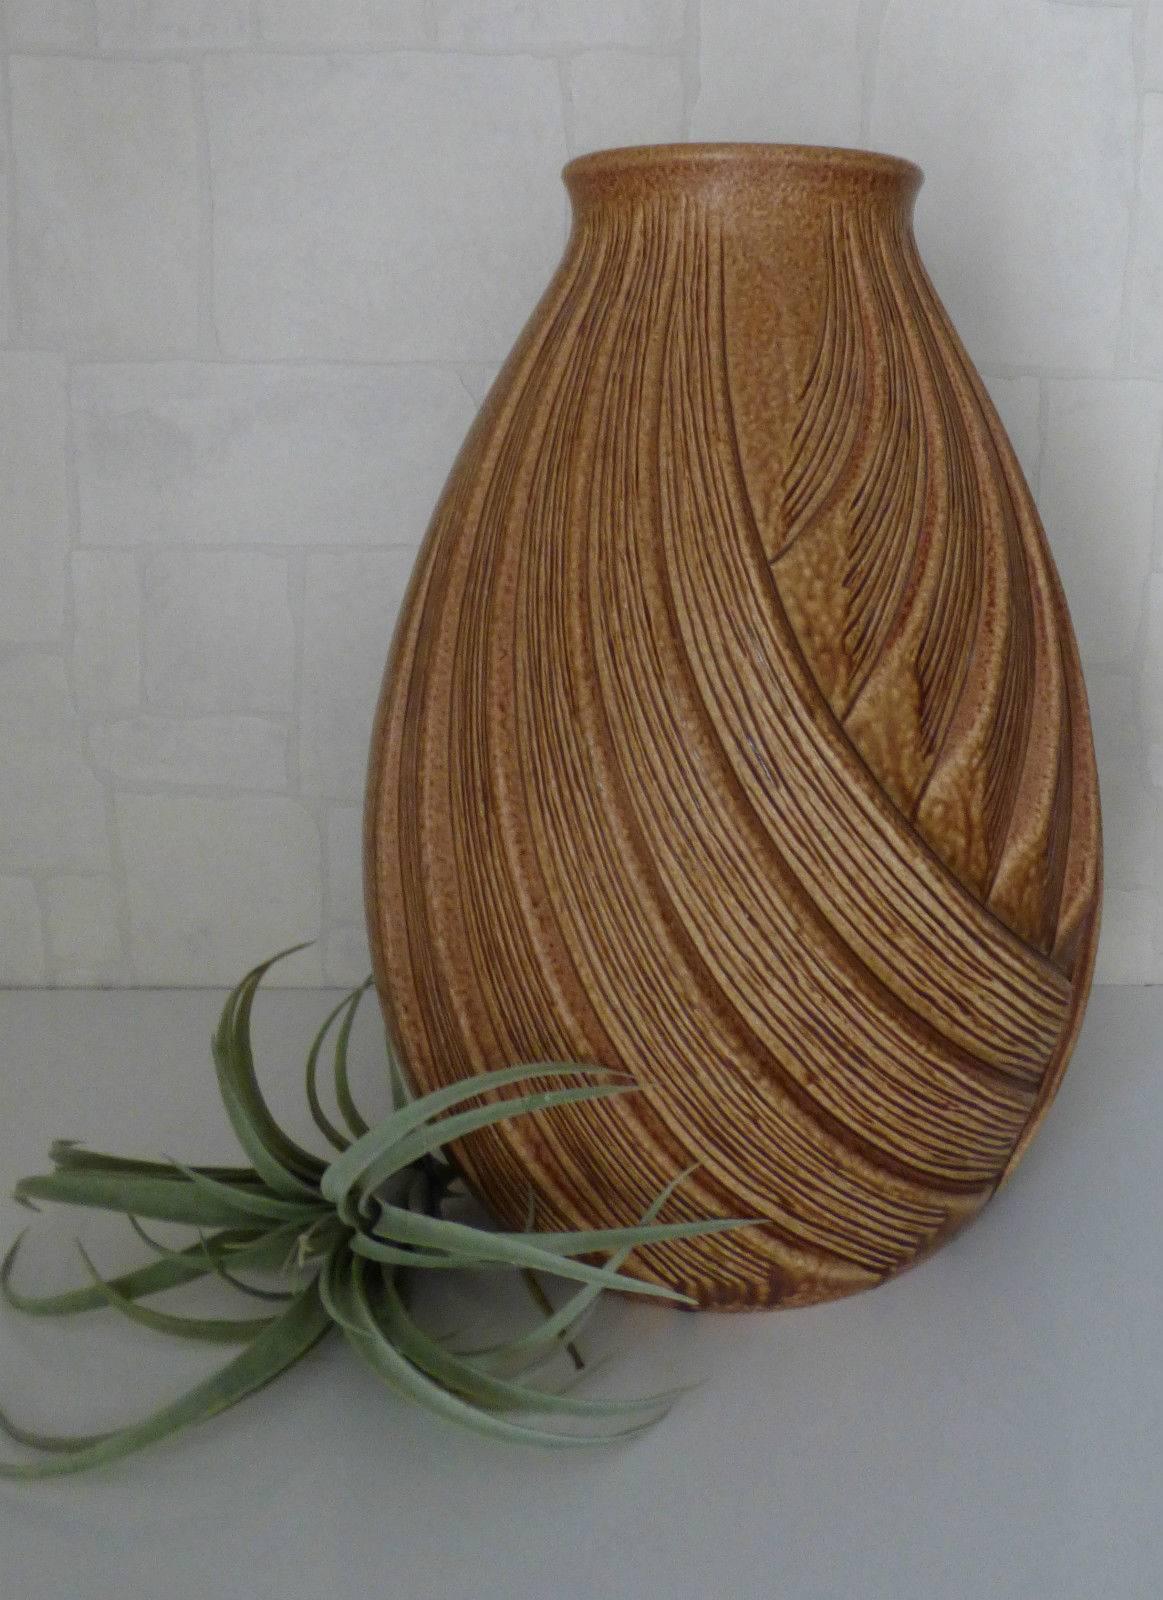 German Early Contemporary Handmade and Hand Glazed Wavy Leaves Pattern Vase, 1960